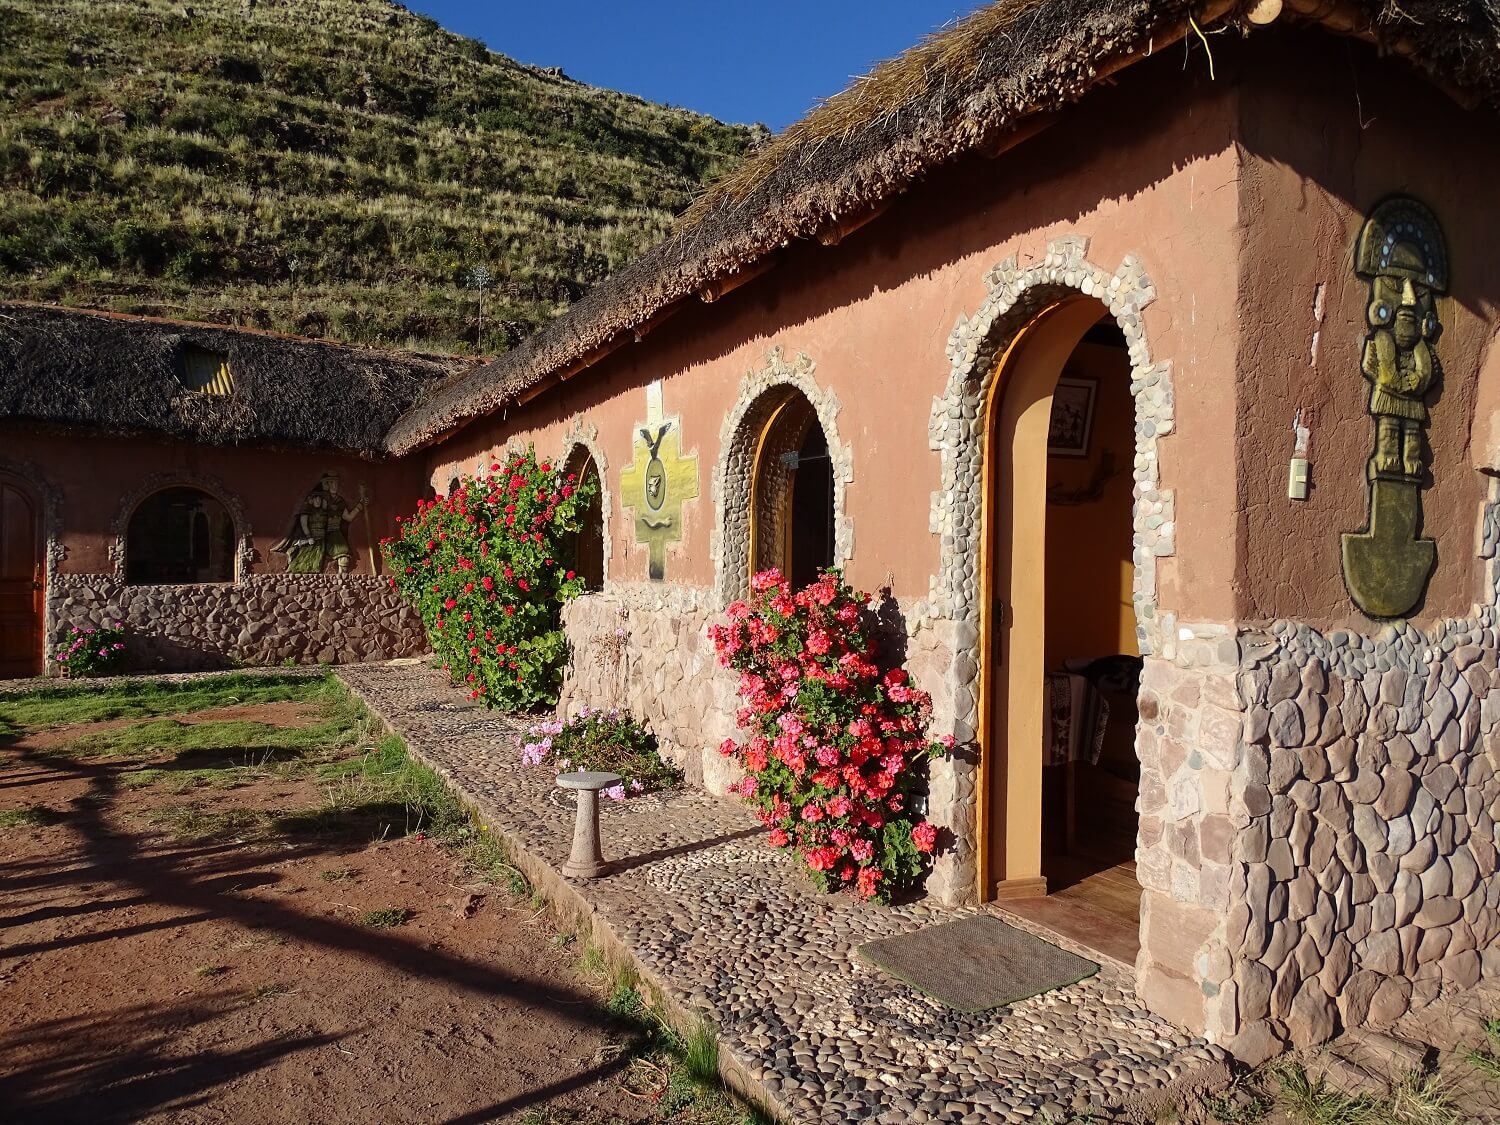 11Inti Wasi homestay at Capachica peninsula, part of the community-based tourism offer by RESPONSible Travel Peru